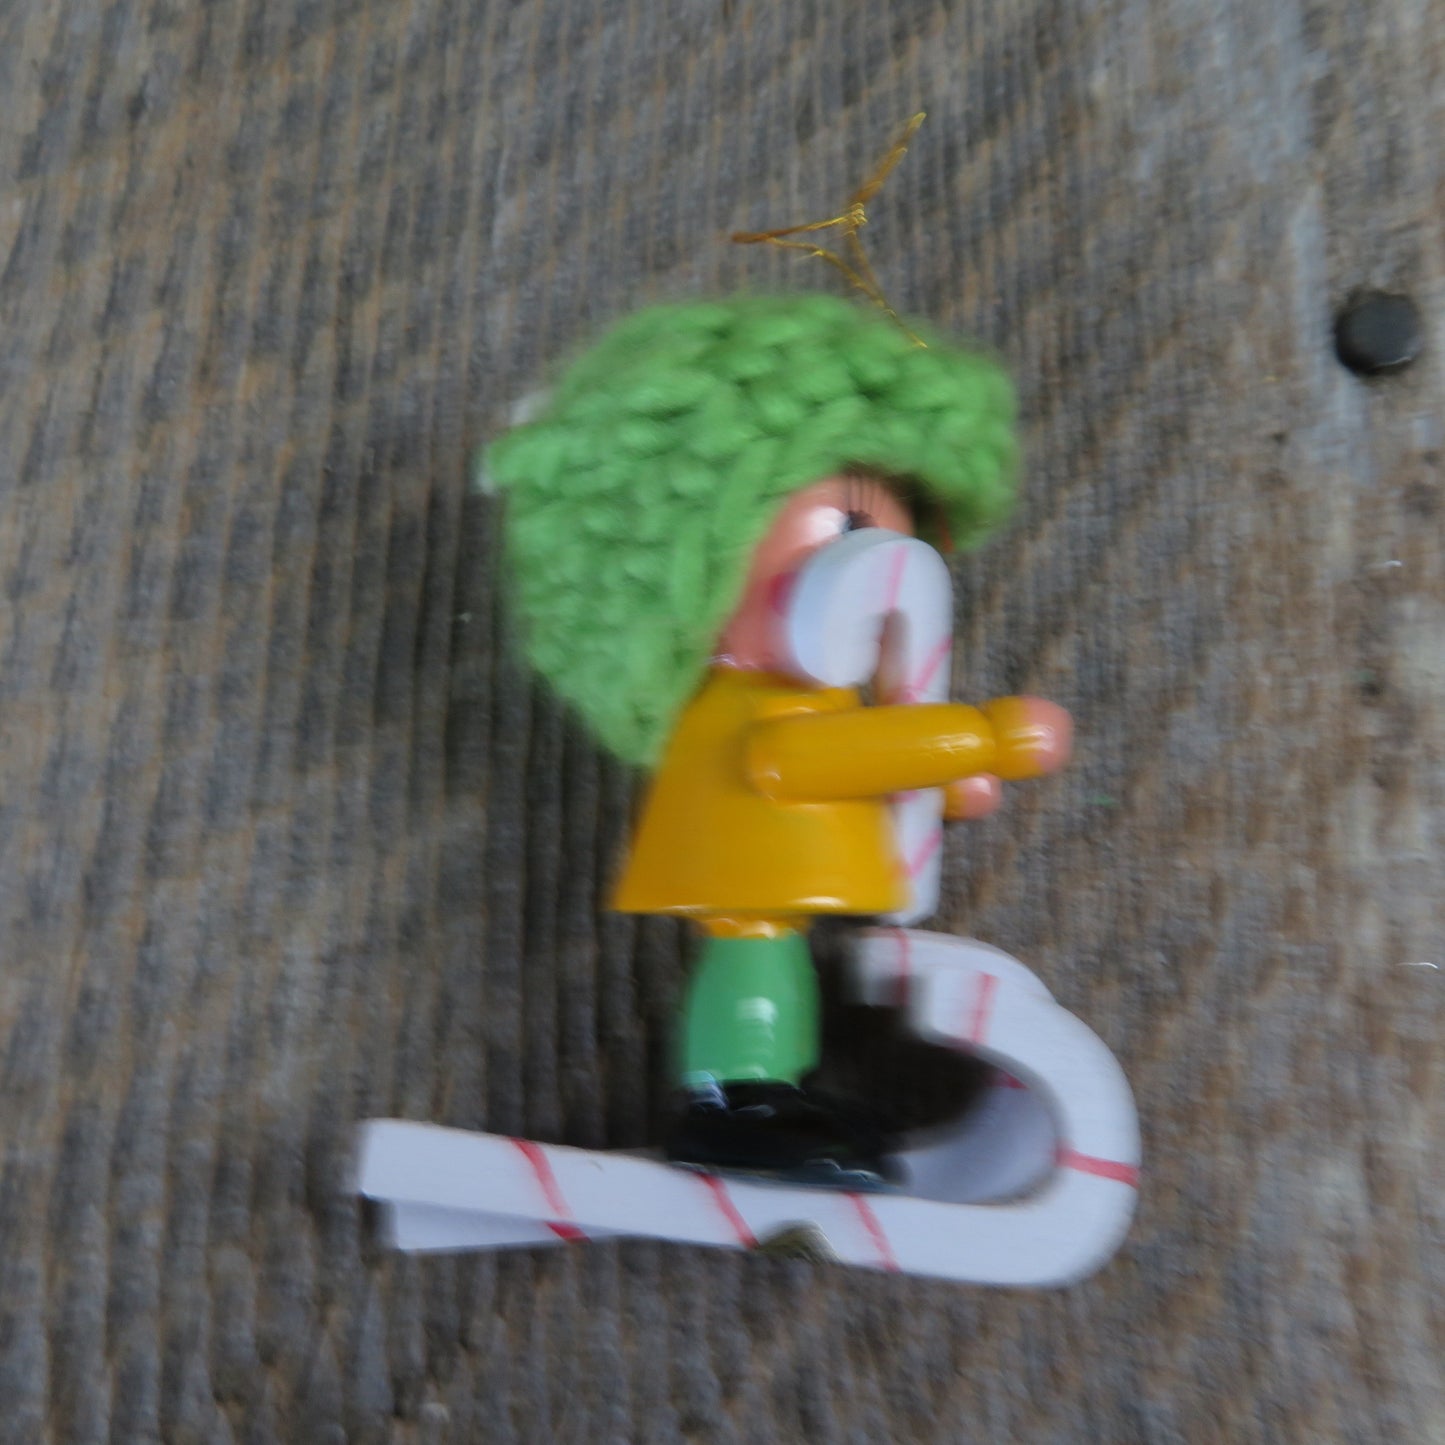 Vintage Girl Skiing with Candy Cane Ornament Green Knit Hat Yellow Shirt Candy Cane Skis